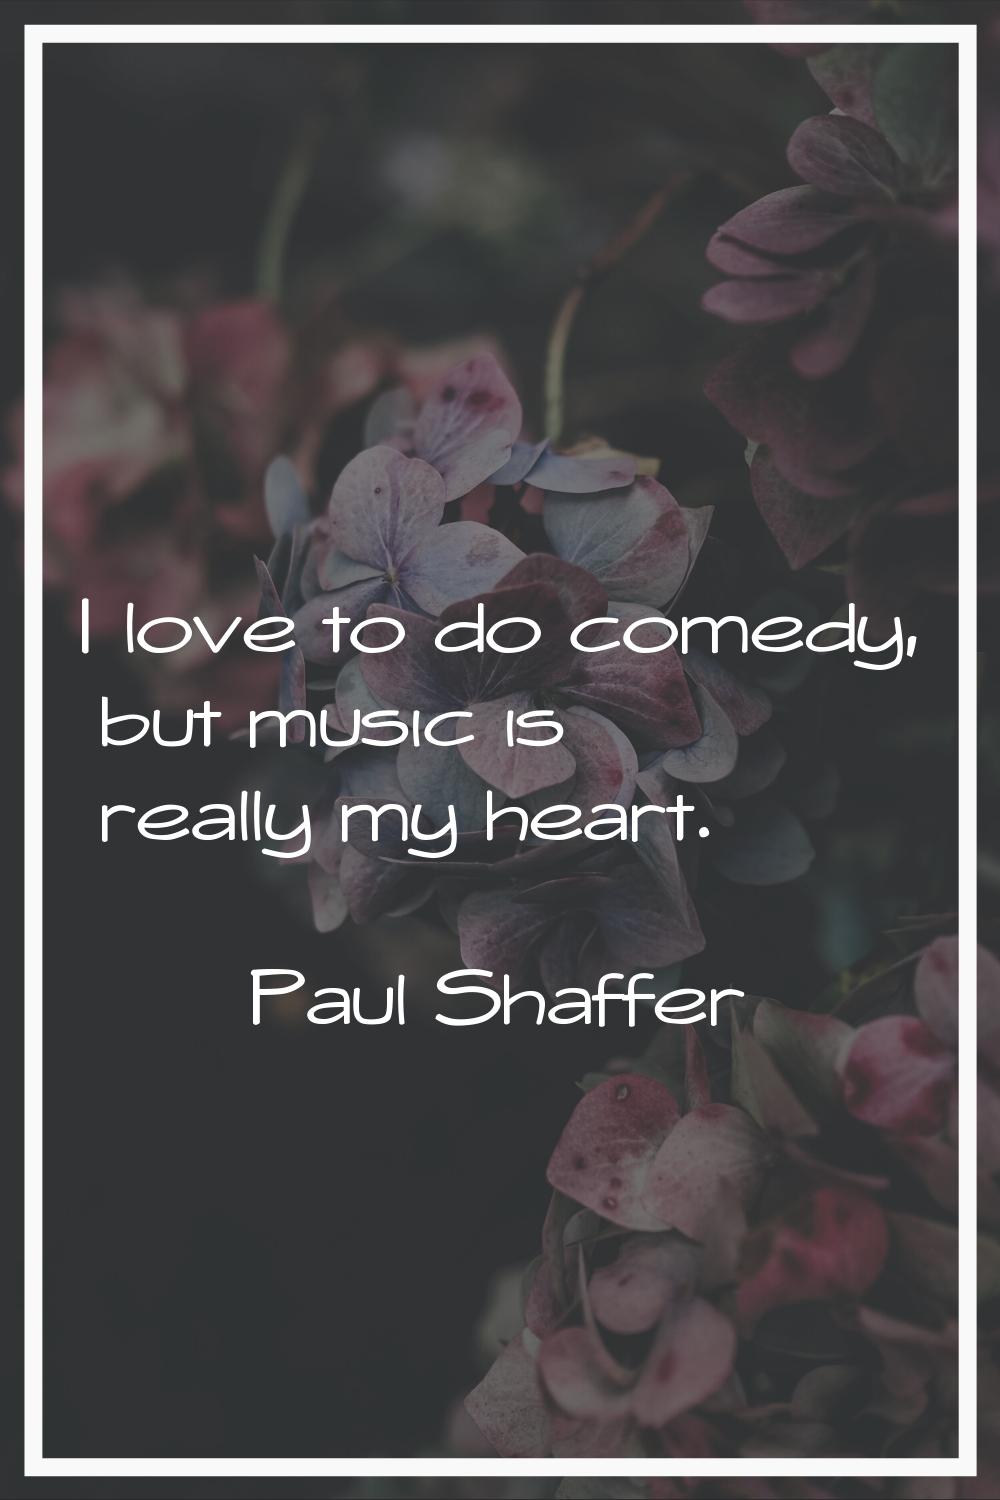 I love to do comedy, but music is really my heart.